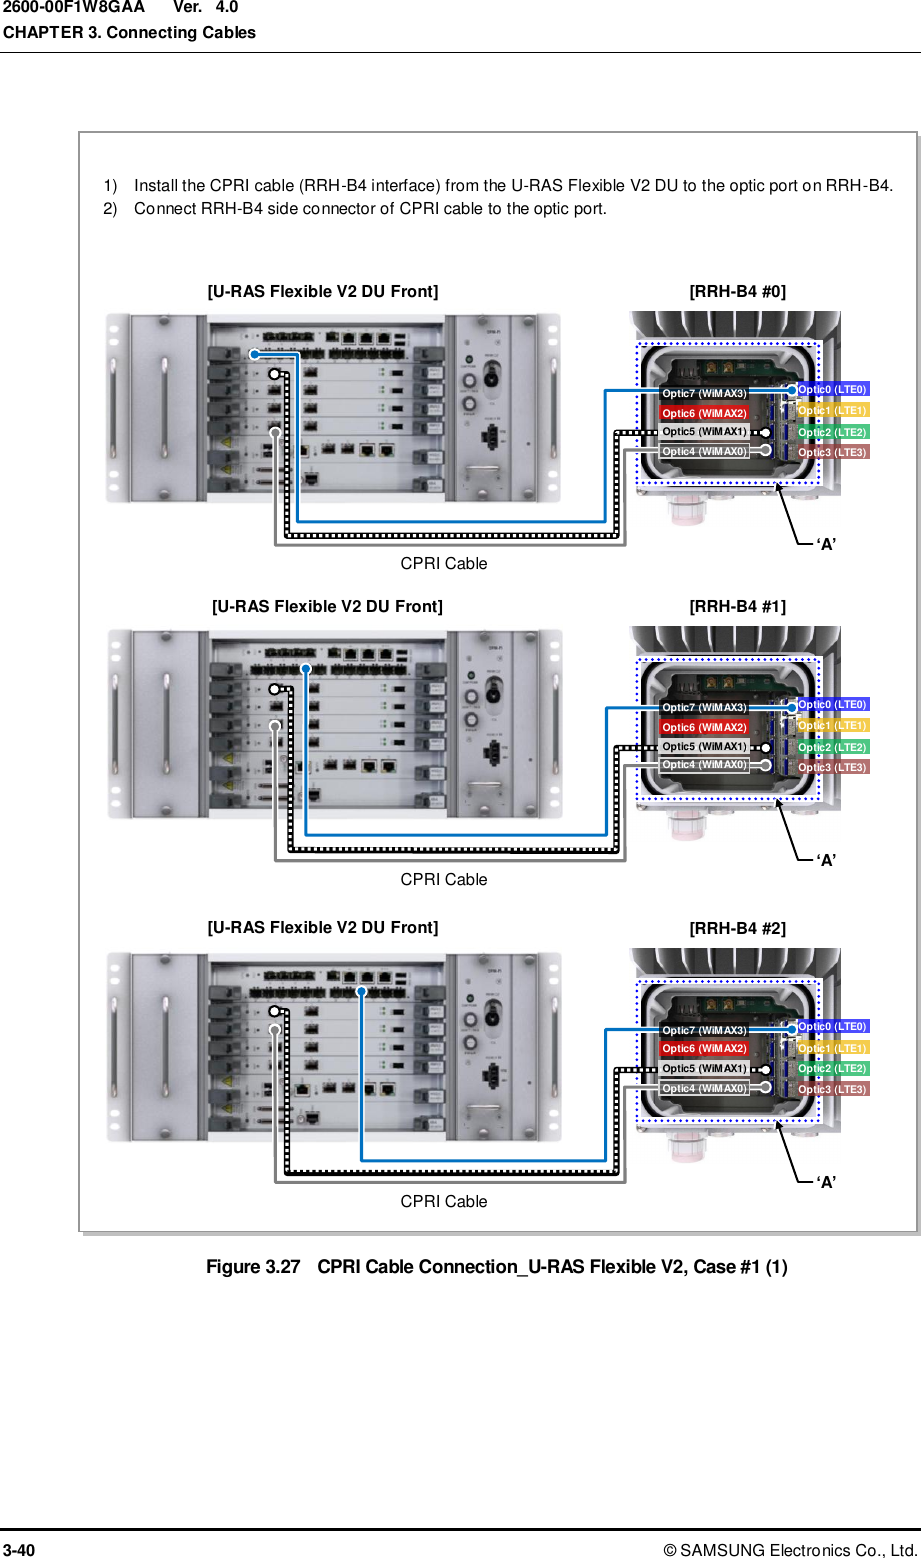  Ver.  CHAPTER 3. Connecting Cables 3-40 ©  SAMSUNG Electronics Co., Ltd. 2600-00F1W8GAA 4.0  Figure 3.27  CPRI Cable Connection_U-RAS Flexible V2, Case #1 (1)  1)    Install the CPRI cable (RRH-B4 interface) from the U-RAS Flexible V2 DU to the optic port on RRH-B4. 2)    Connect RRH-B4 side connector of CPRI cable to the optic port. ‘A’ ‘A’ [RRH-B4 #0] [U-RAS Flexible V2 DU Front] [RRH-B4 #1] [U-RAS Flexible V2 DU Front] ‘A’ [RRH-B4 #2] [U-RAS Flexible V2 DU Front] CPRI Cable CPRI Cable CPRI Cable Optic4 (WiMAX0) Optic6 (WiMAX2) Optic5 (WiMAX1) Optic7 (WiMAX3) Optic4 (WiMAX0) Optic6 (WiMAX2) Optic5 (WiMAX1) Optic4 (WiMAX0) Optic6 (WiMAX2) Optic5 (WiMAX1) Optic7 (WiMAX3) Optic7 (WiMAX3) Optic0 (LTE0) Optic1 (LTE1) Optic3 (LTE3) Optic2 (LTE2) Optic0 (LTE0) Optic1 (LTE1) Optic2 (LTE2) Optic3 (LTE3) Optic0 (LTE0) Optic1 (LTE1) Optic2 (LTE2) Optic3 (LTE3) 